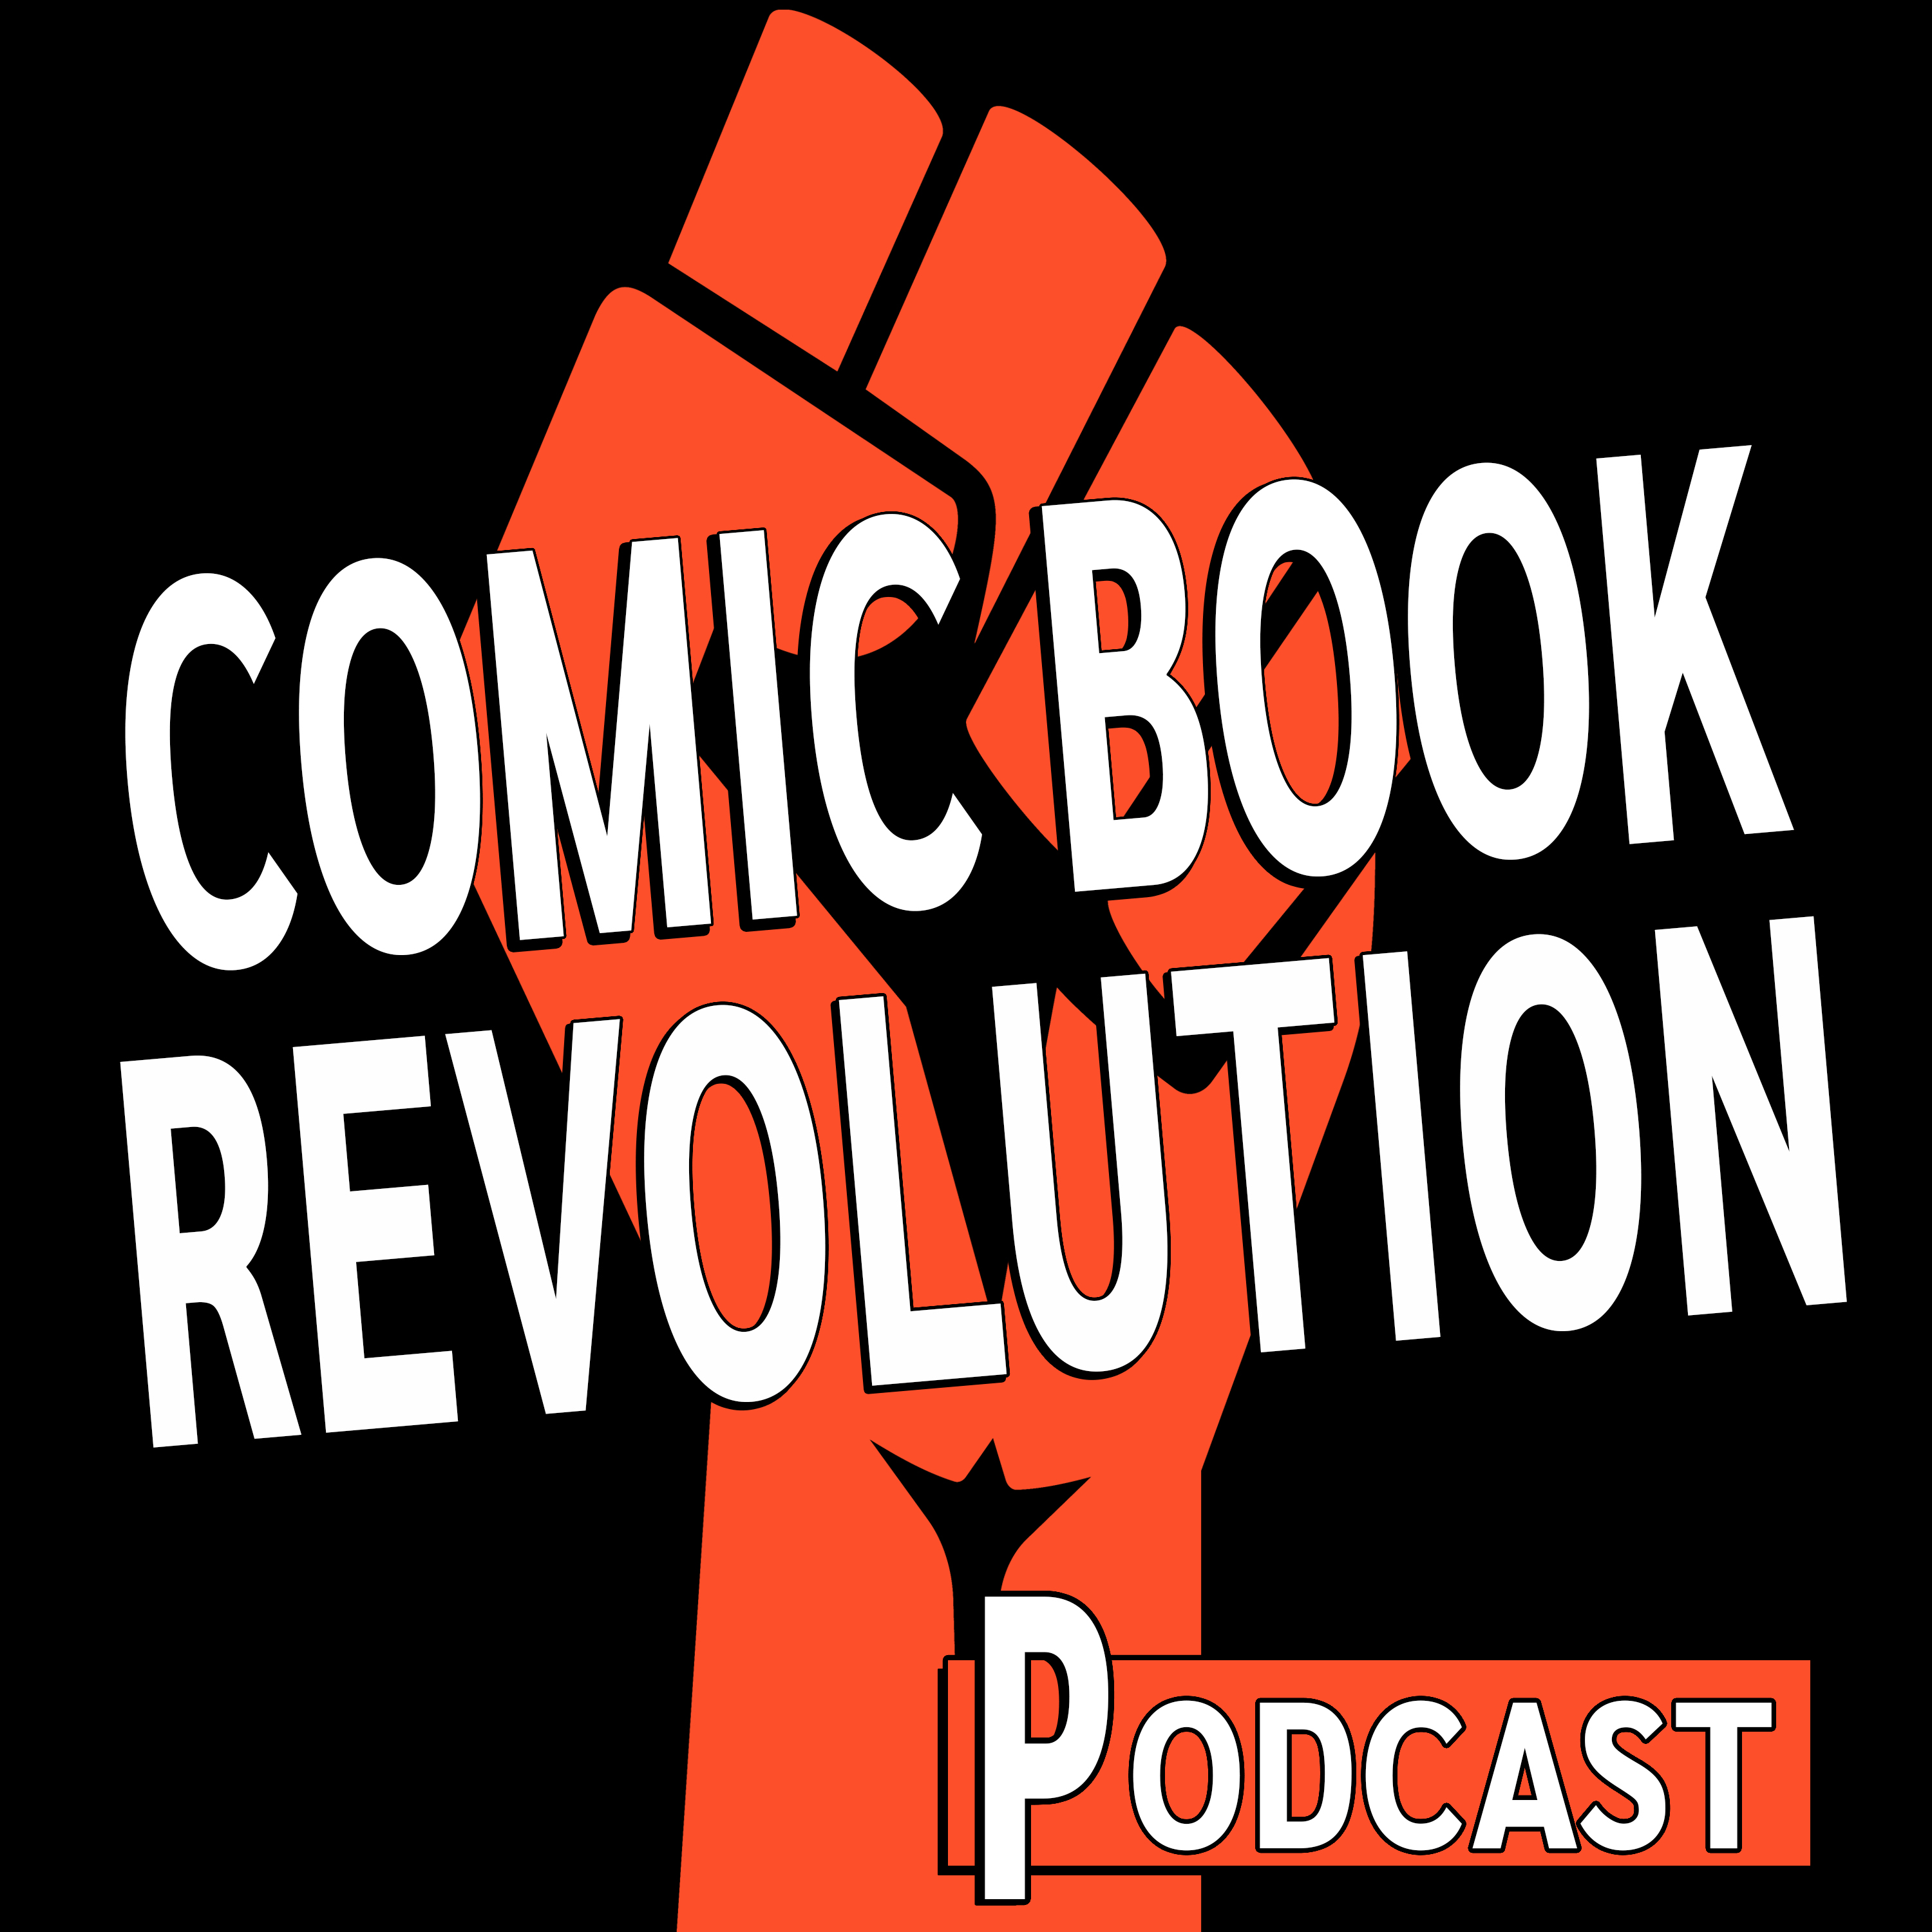 Dawn of DC Delivers More New DC Comics Titles - Comic Book Revolution Podcast Ep. 102